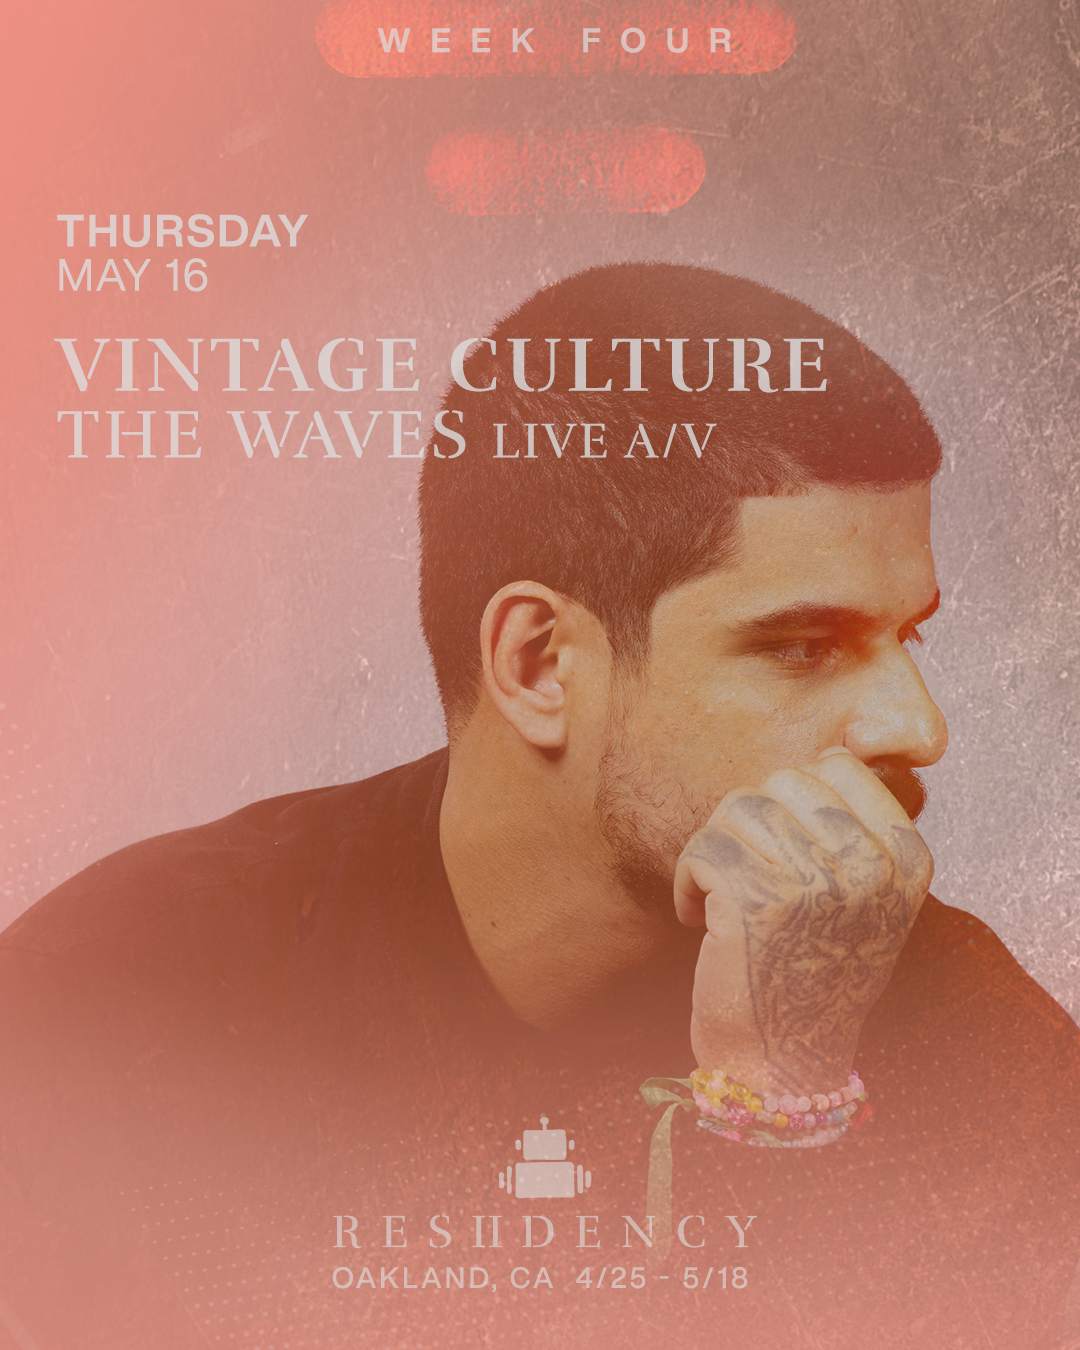 Robot Heart RESIIDENCY - Show 14 - Vintage Culture - The WAVES Live - Página frontal